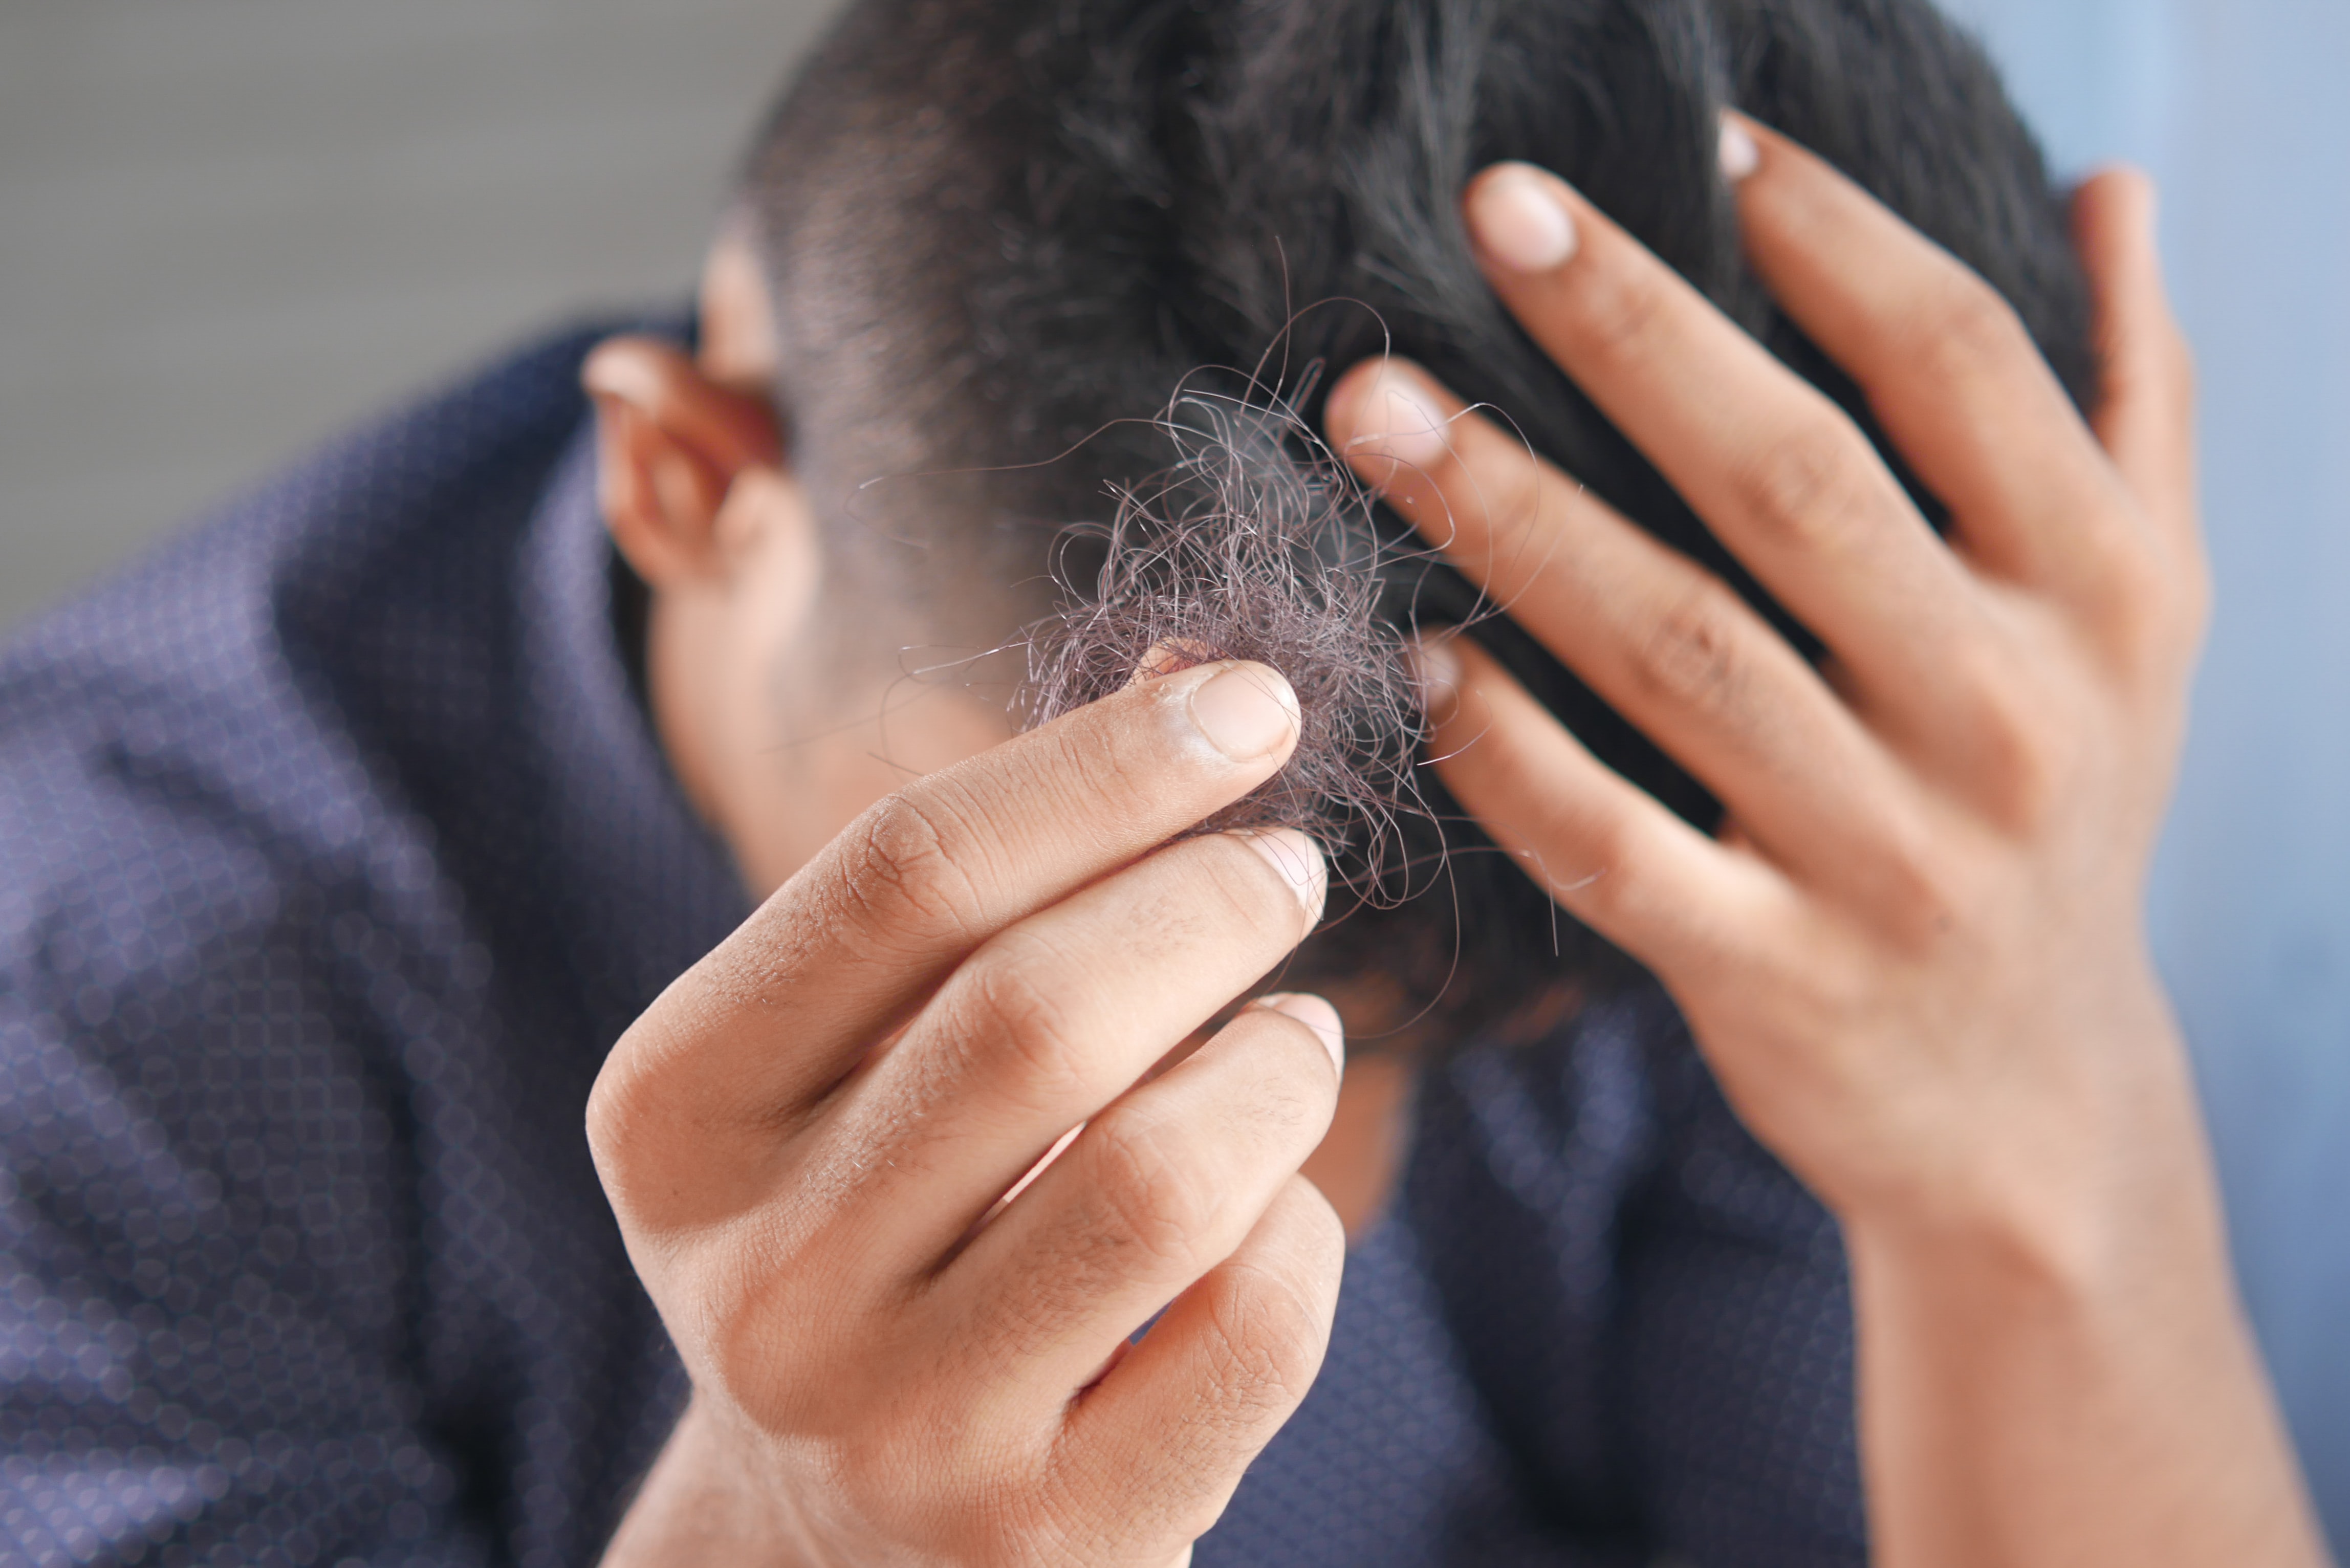 What Hormones Cause Hair Loss?